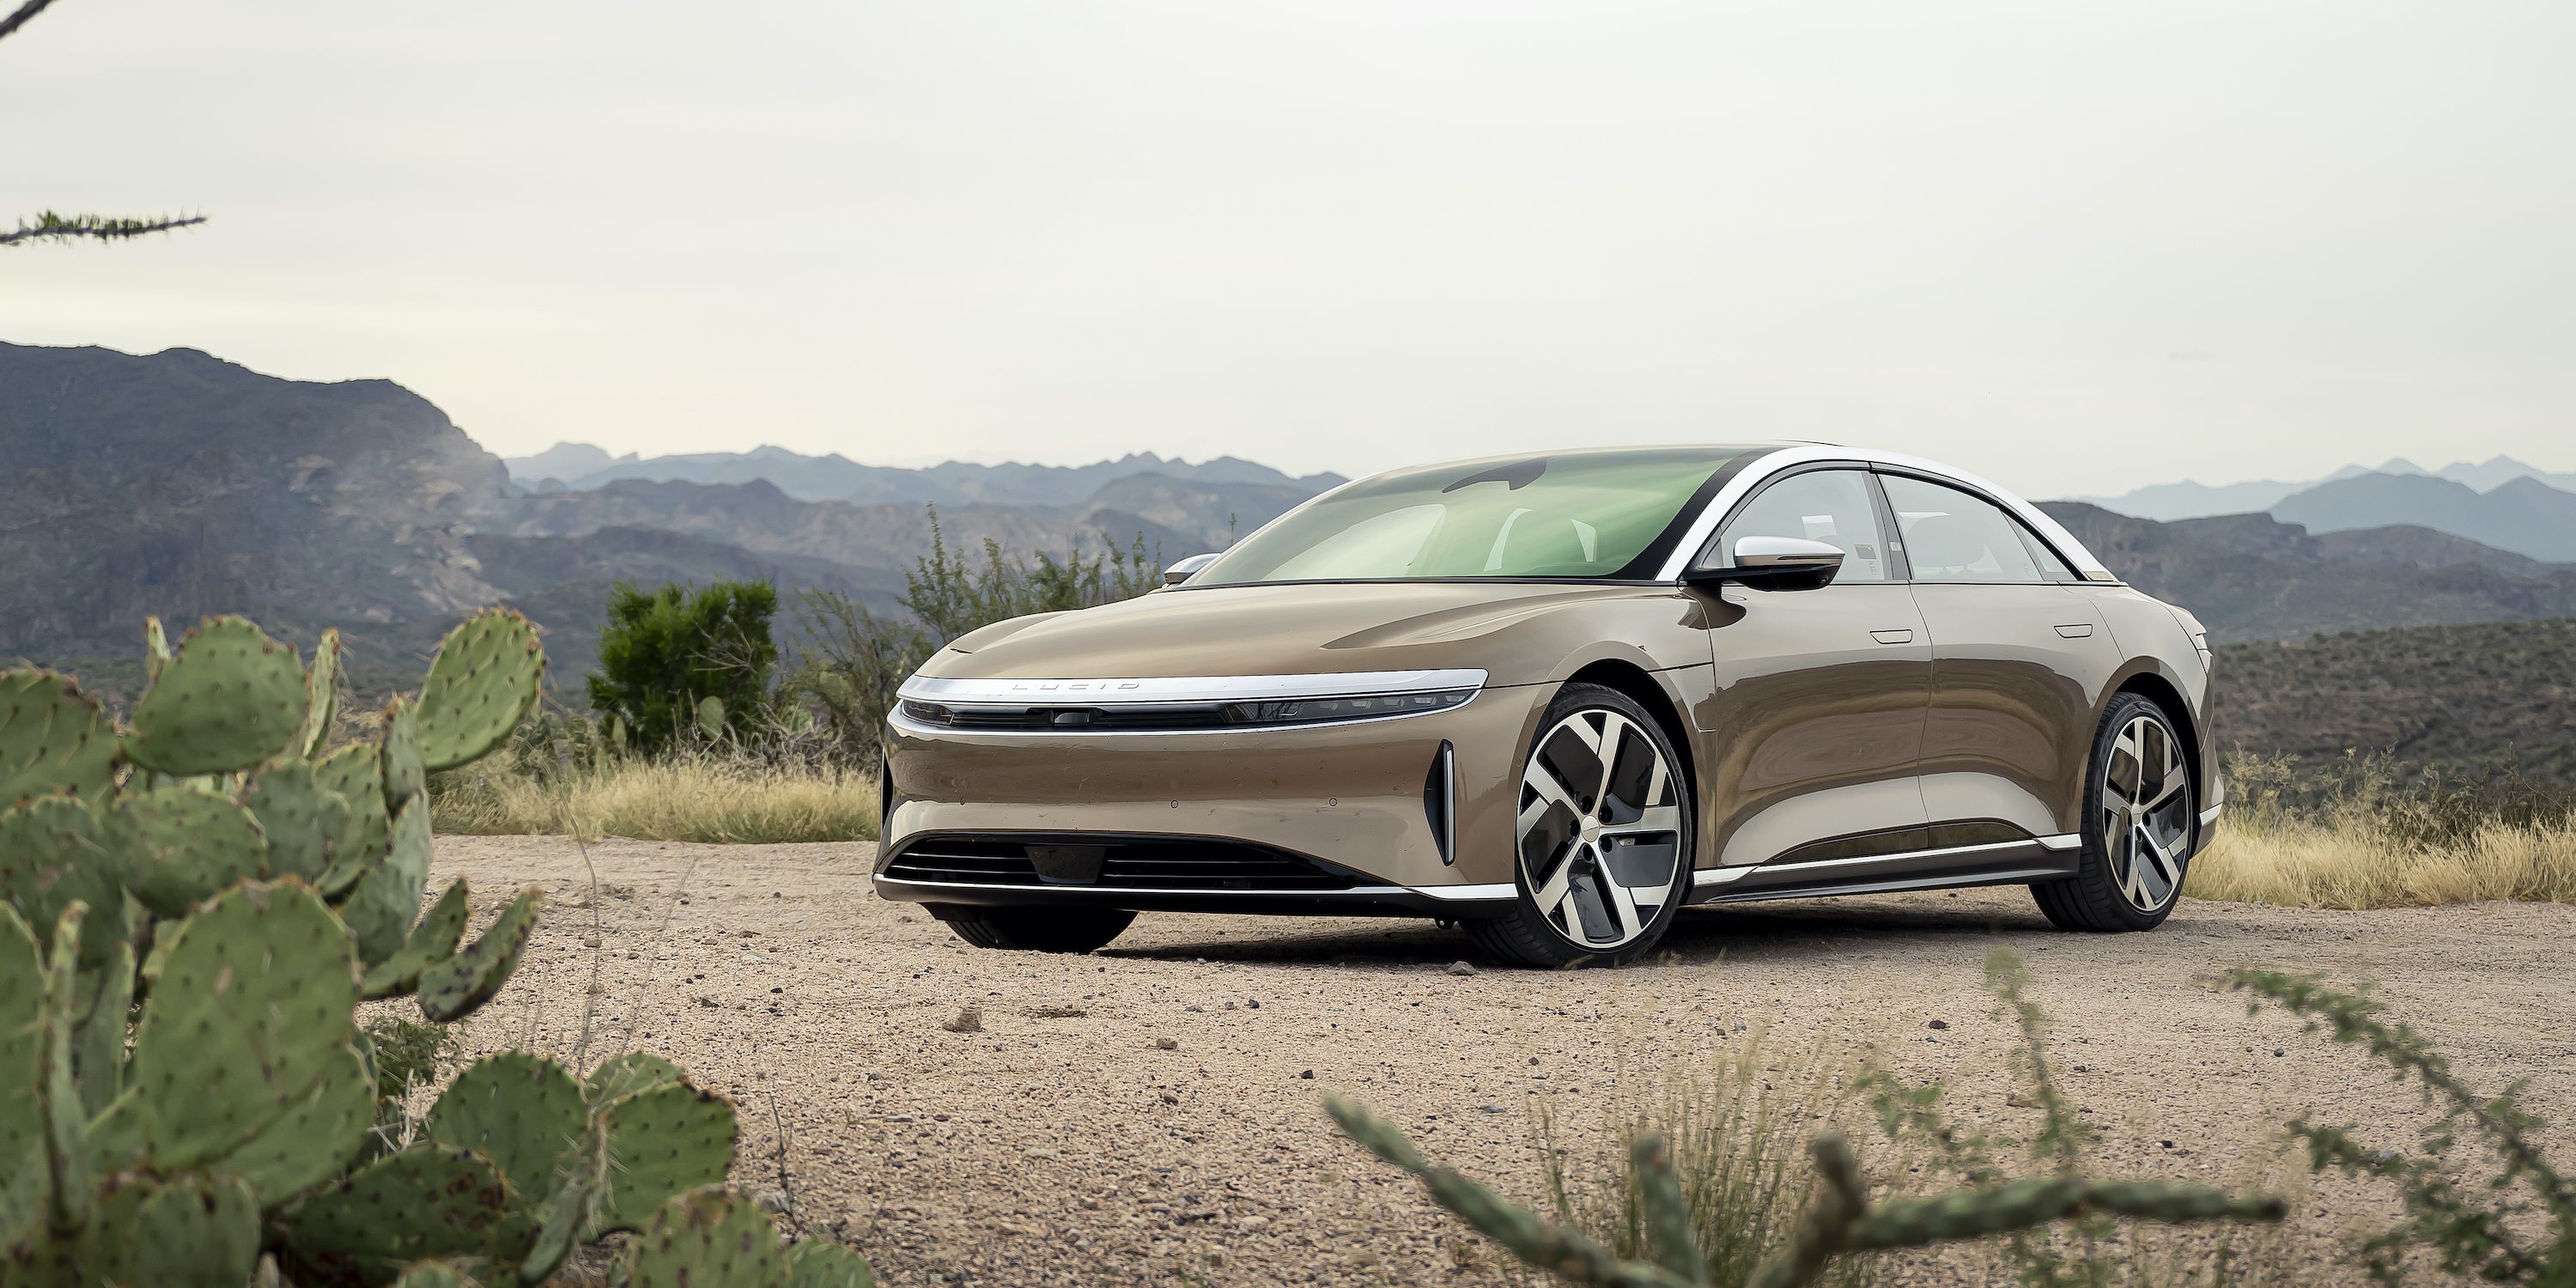 Three Recalls Issued for Lucid Air in One Day